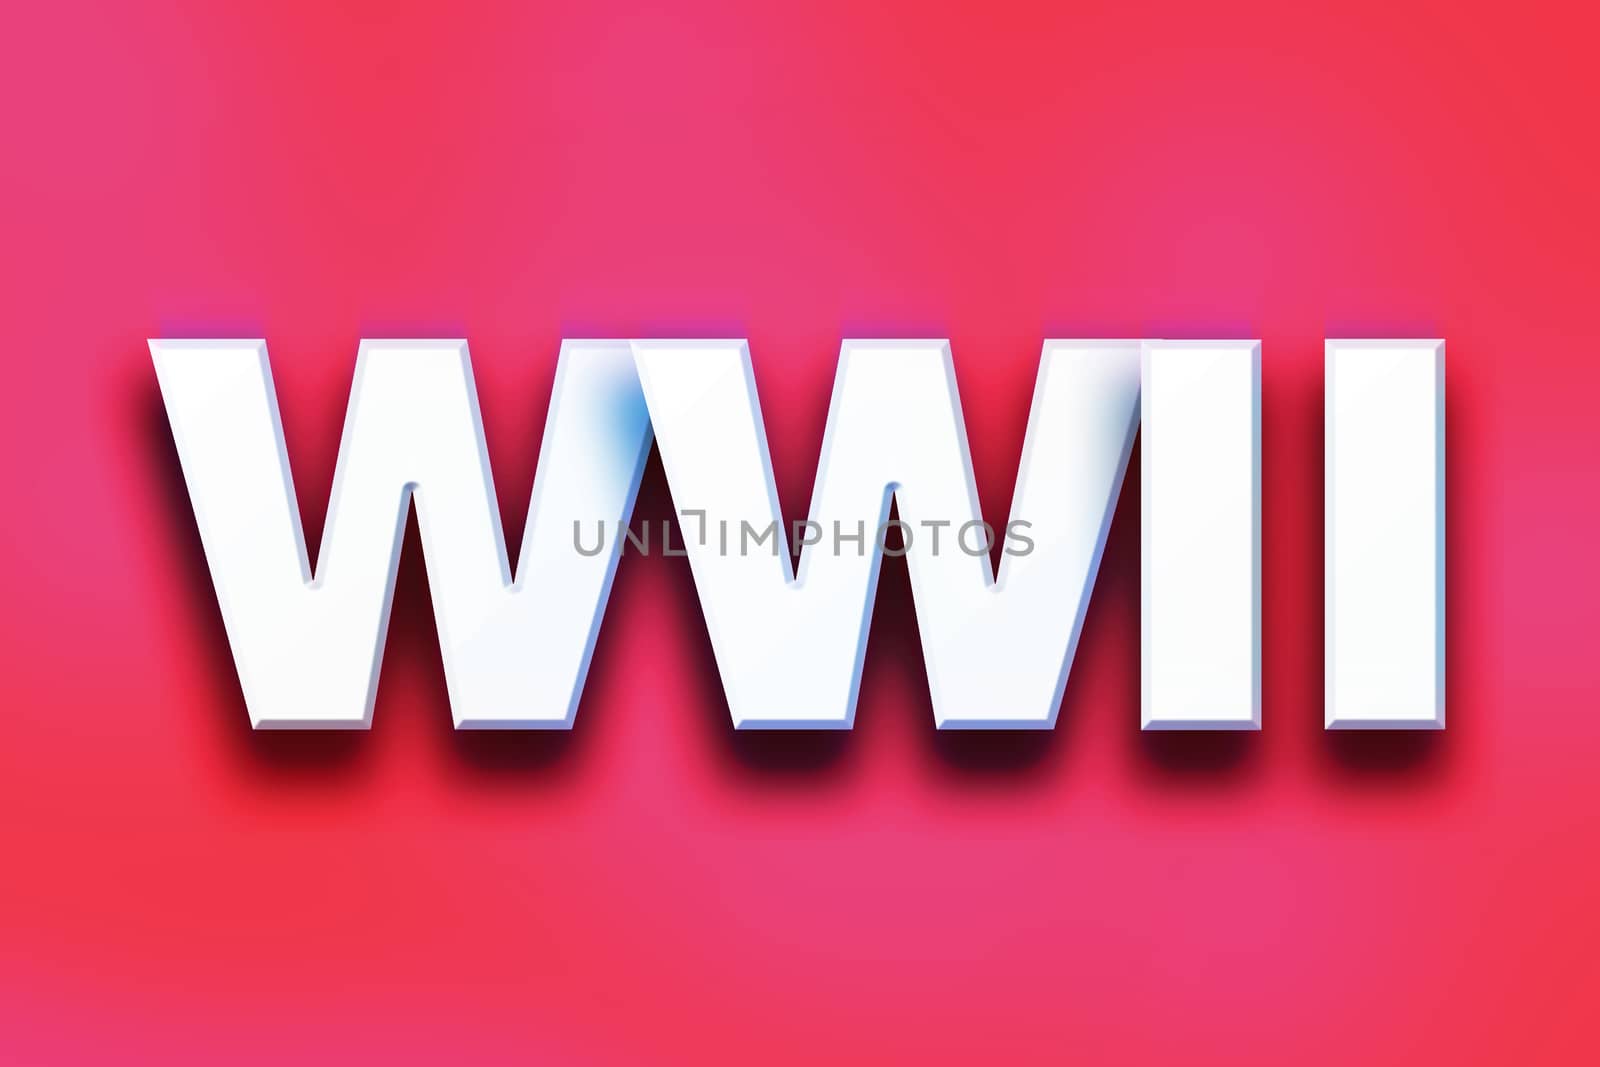 The word "WWII" written in white 3D letters on a colorful background concept and theme.